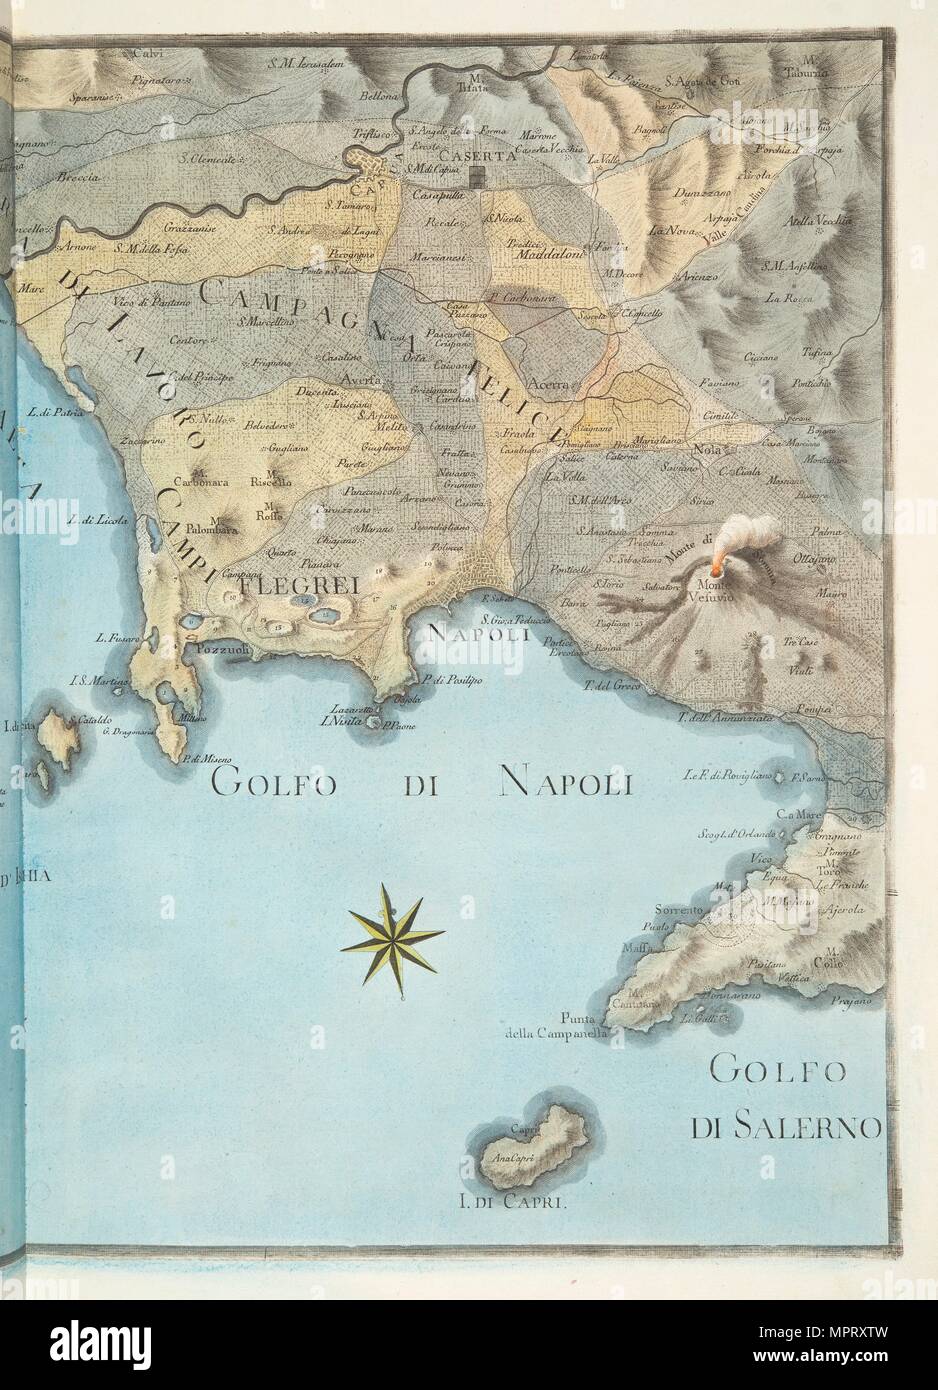 Map of the Gulf of Naples and surrounding area, 1776. Stock Photo